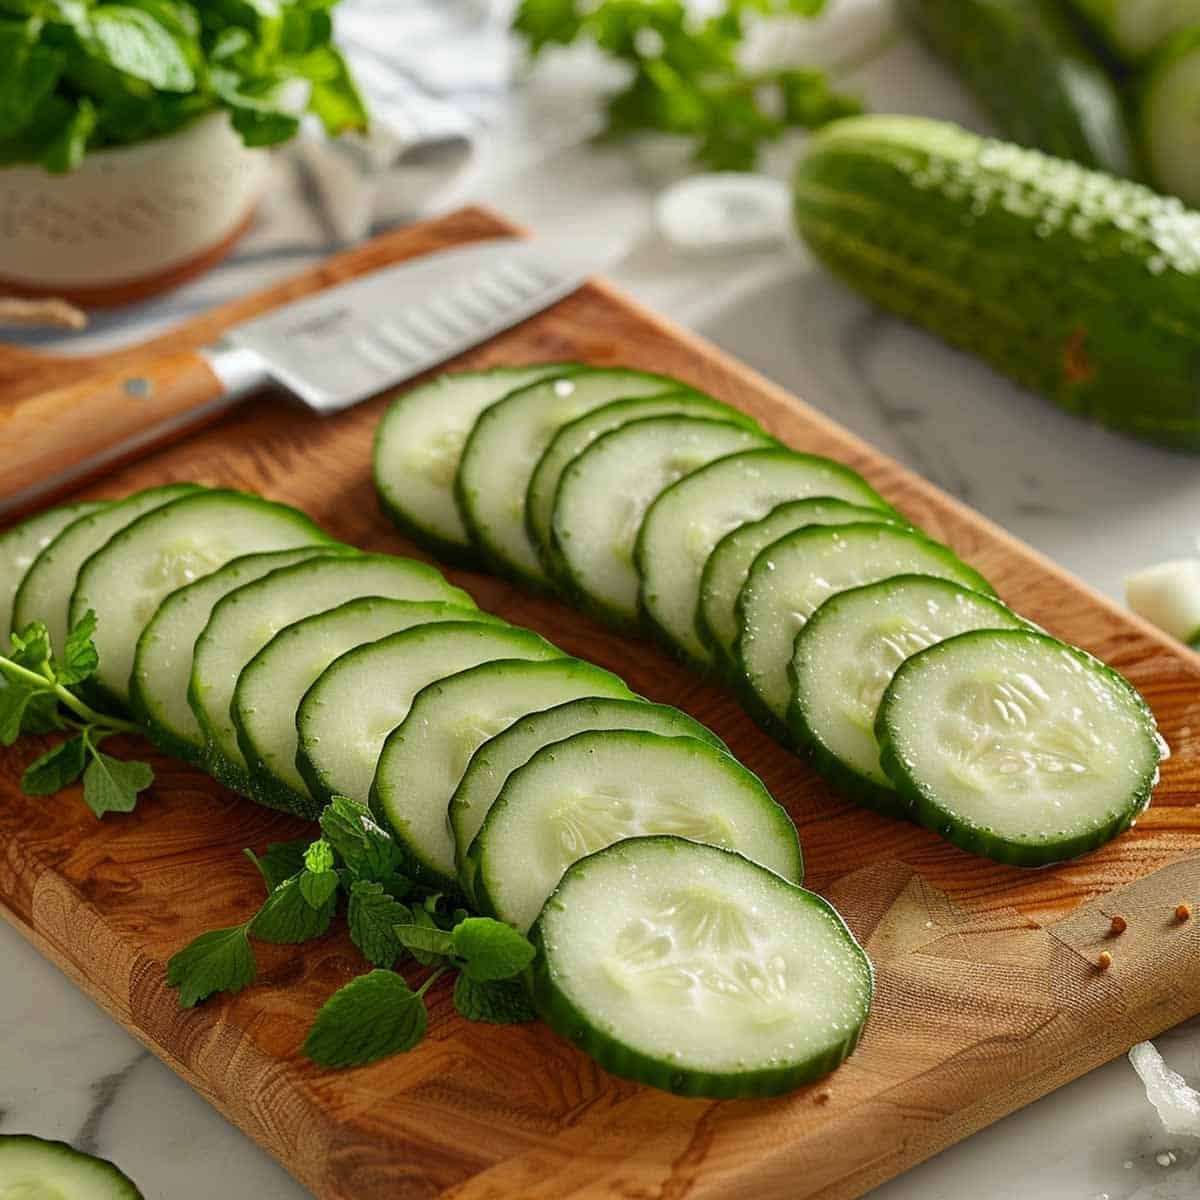 Slicing cucumbers into thin rounds on a cutting board.